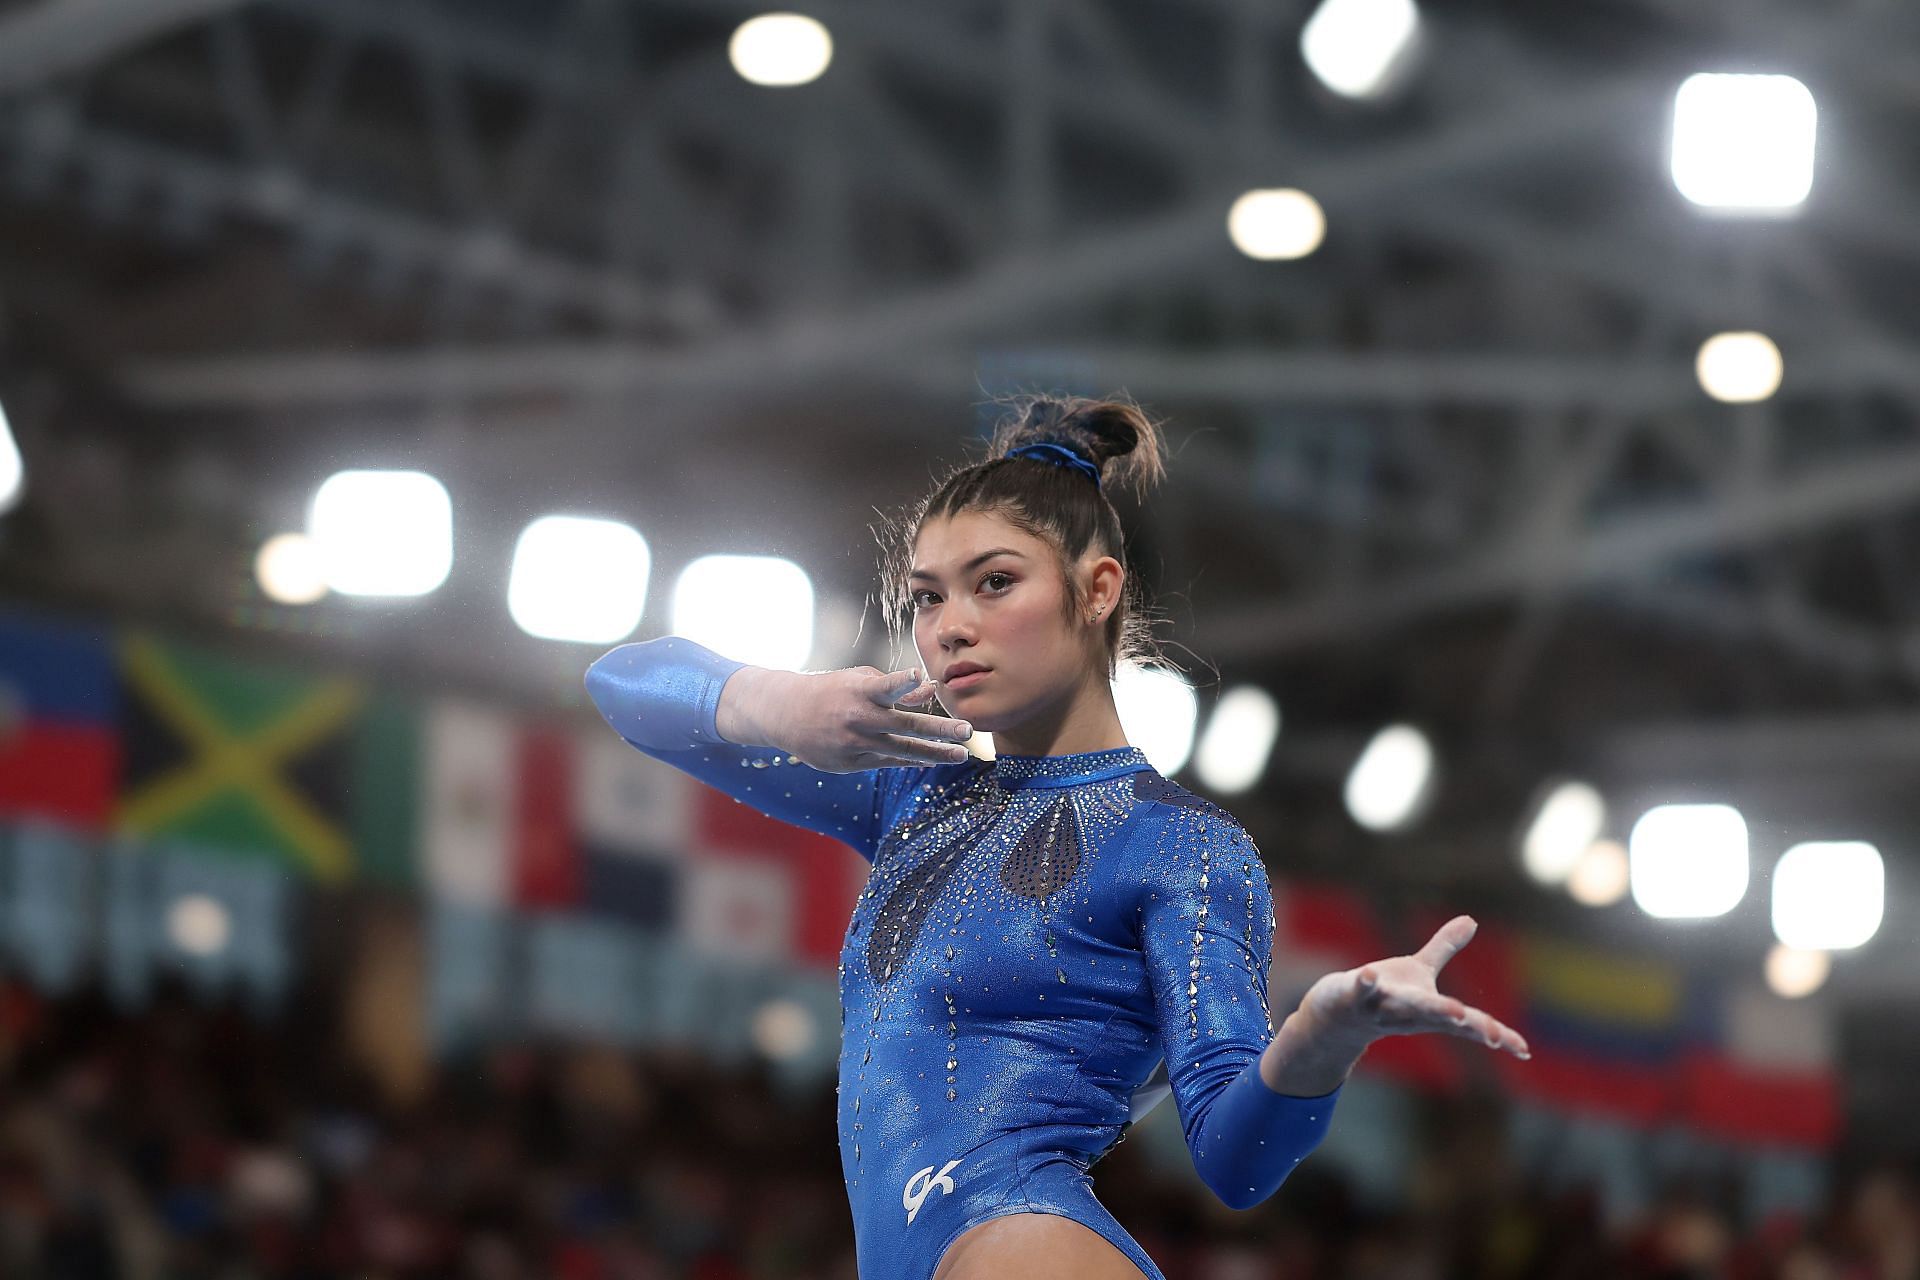 Kayla Dicello competes on floor as part of Gymnastics - Women&#039;s All Around at the Santiago 2023 Pan Am Games. (Photo by Al Bello/Getty Images)